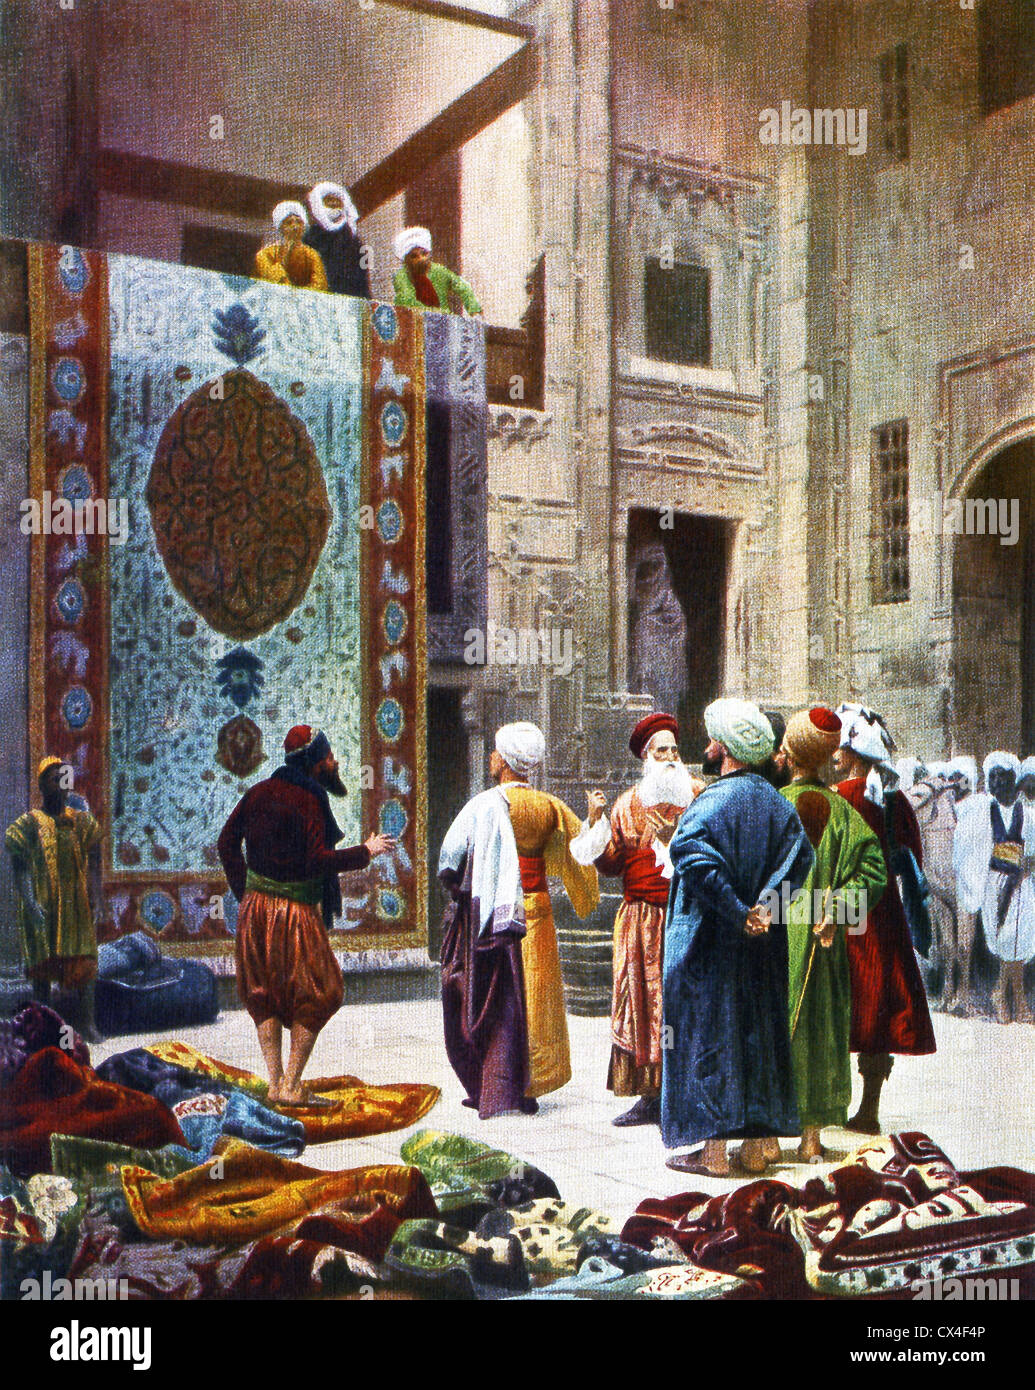 Jean-Leon Gerome, a French painter and sculptor, titled this work The Vendor of Rugs. Stock Photo